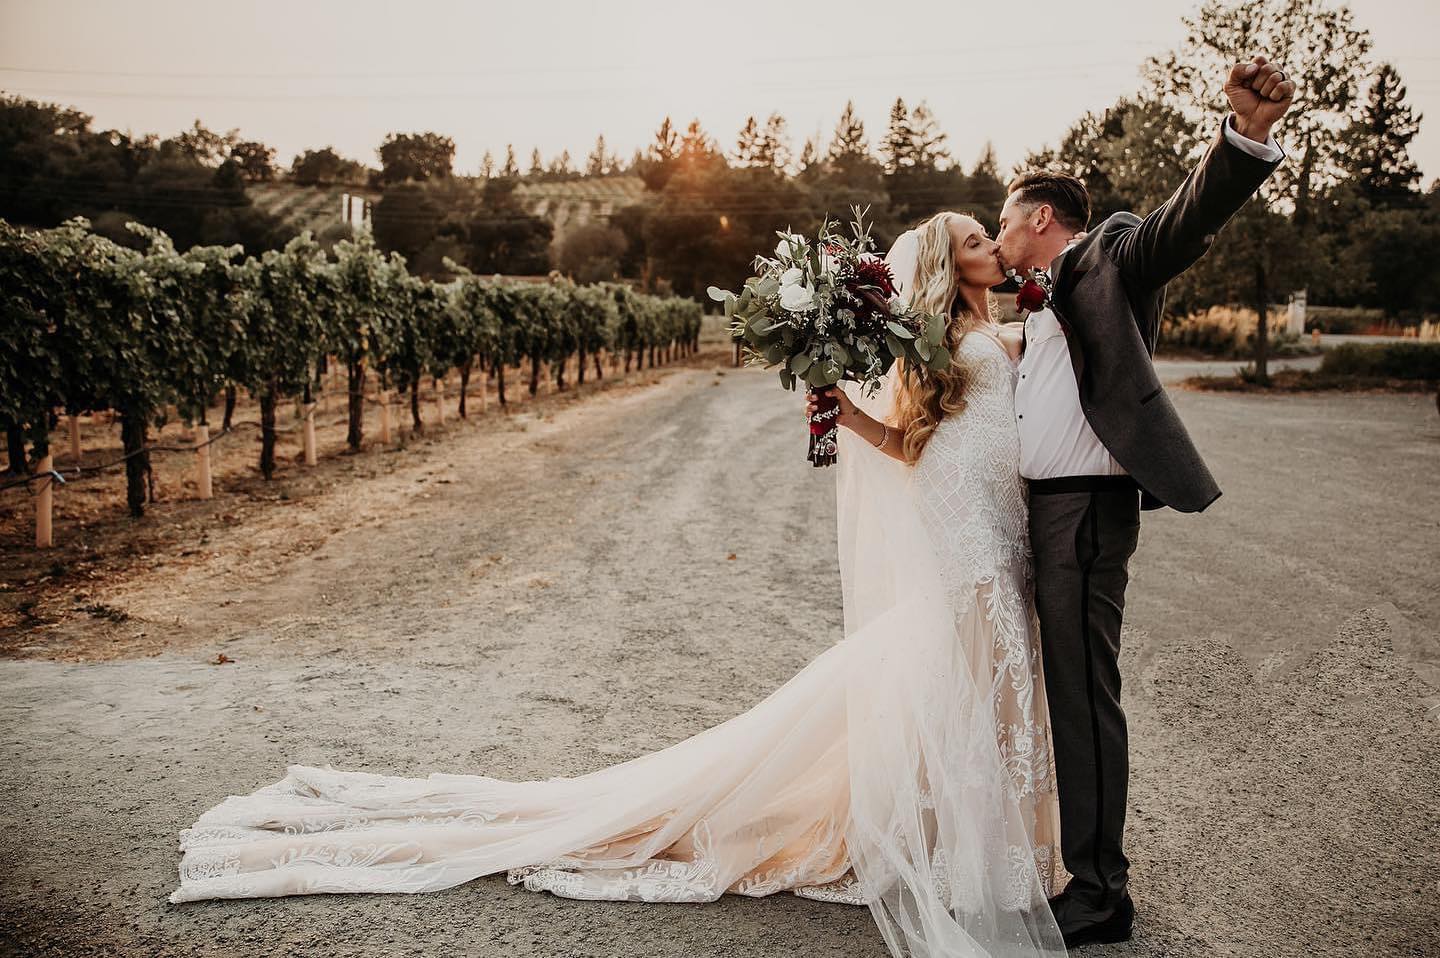 Bride and groom kissing holding bouquet on gravel patch with vineyards in background